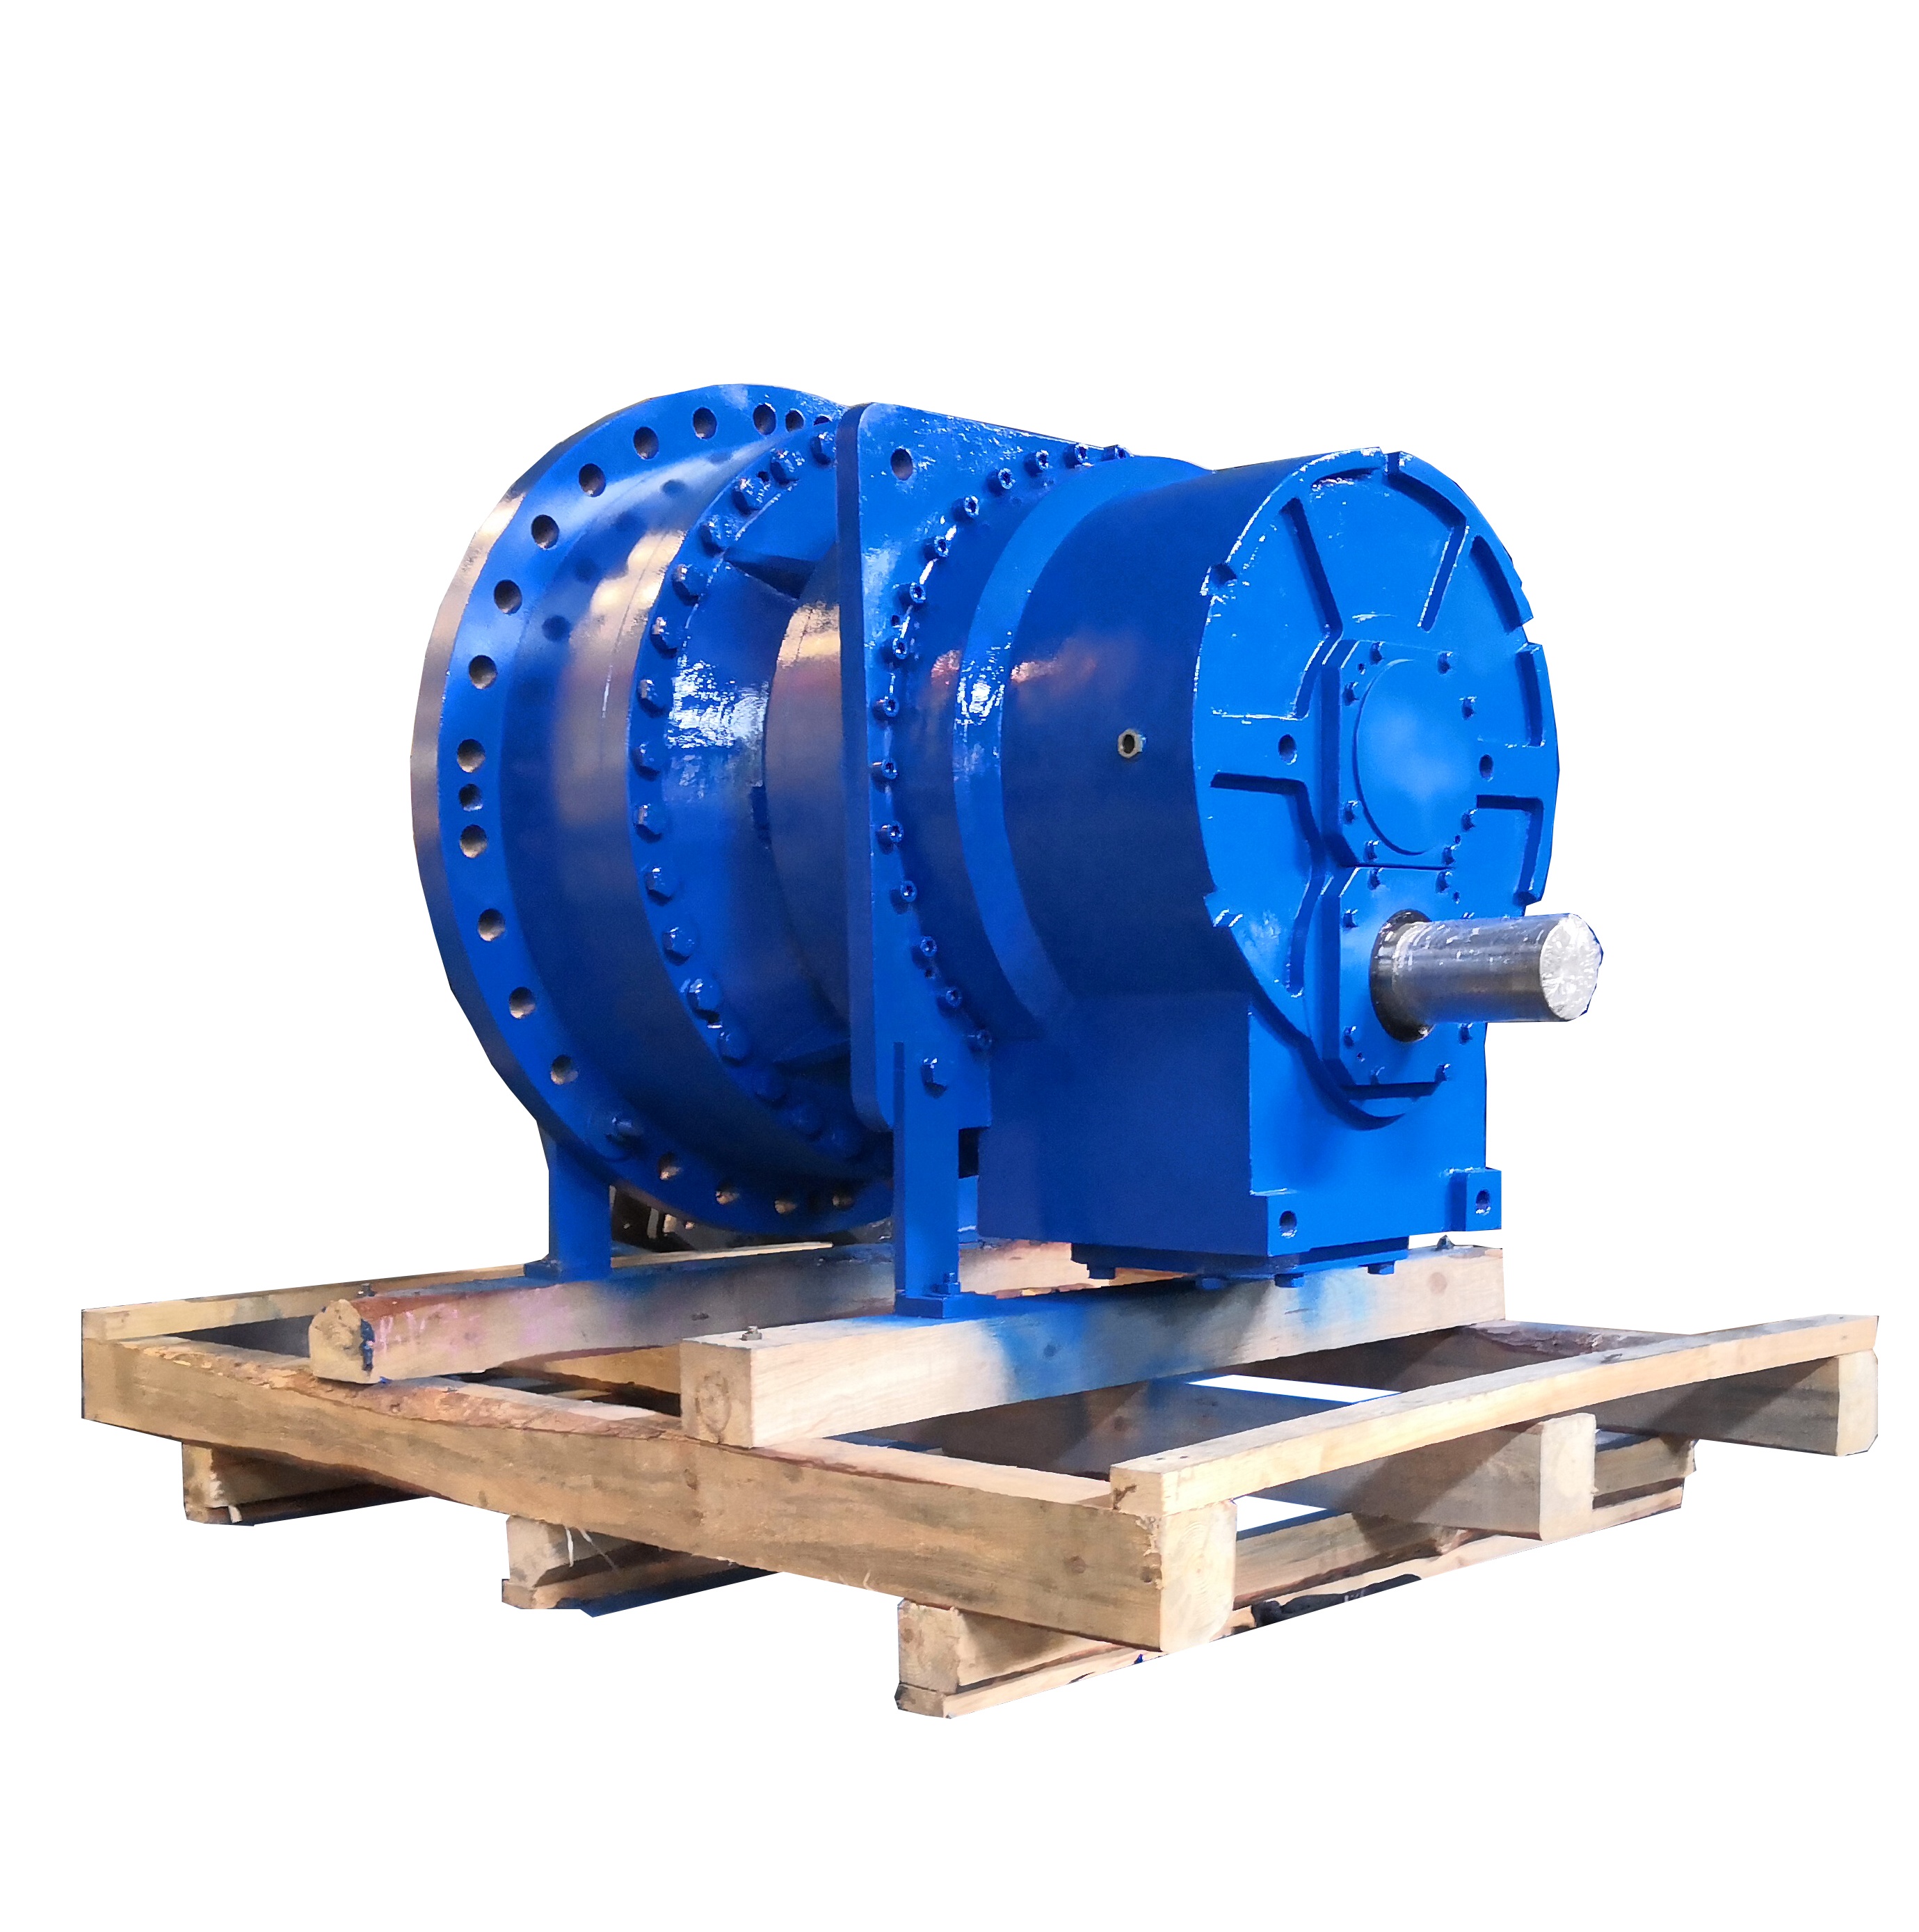 EVERGEAR DRIVE P Series dual scraper gearbox for cement mixer